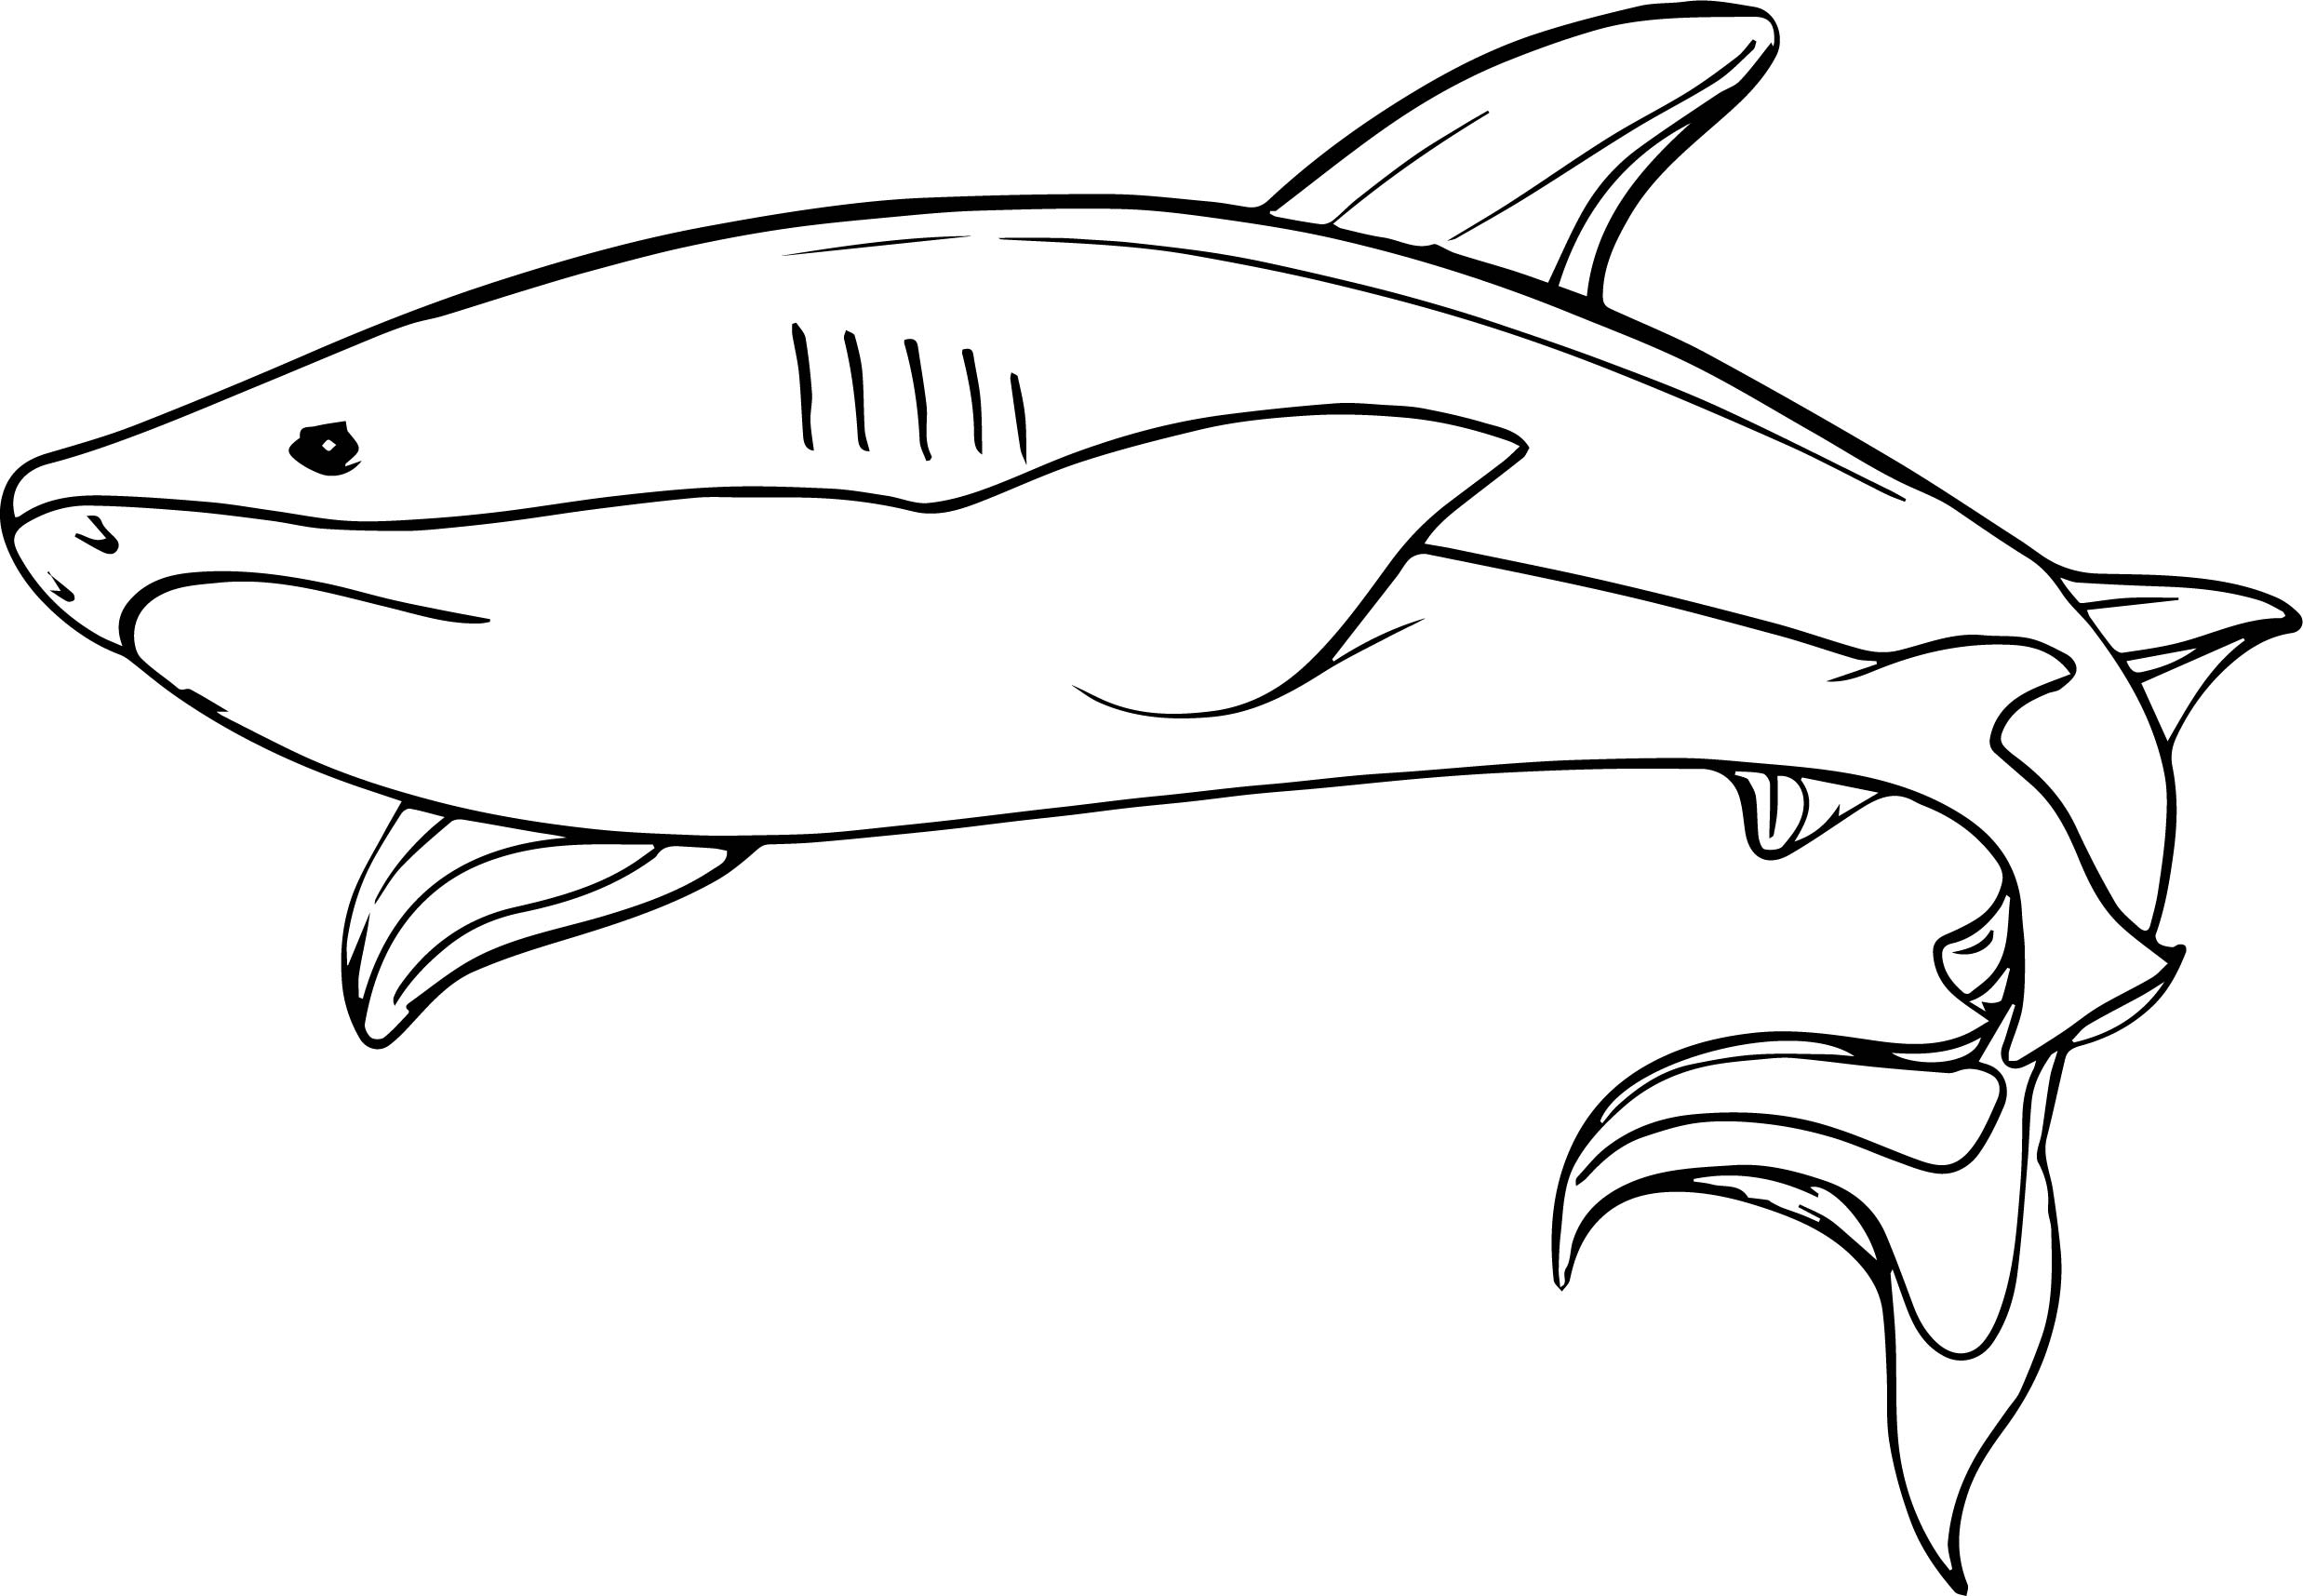 Megalodon Shark Coloring Pages Printable Coloring - Megalodon Shark D...